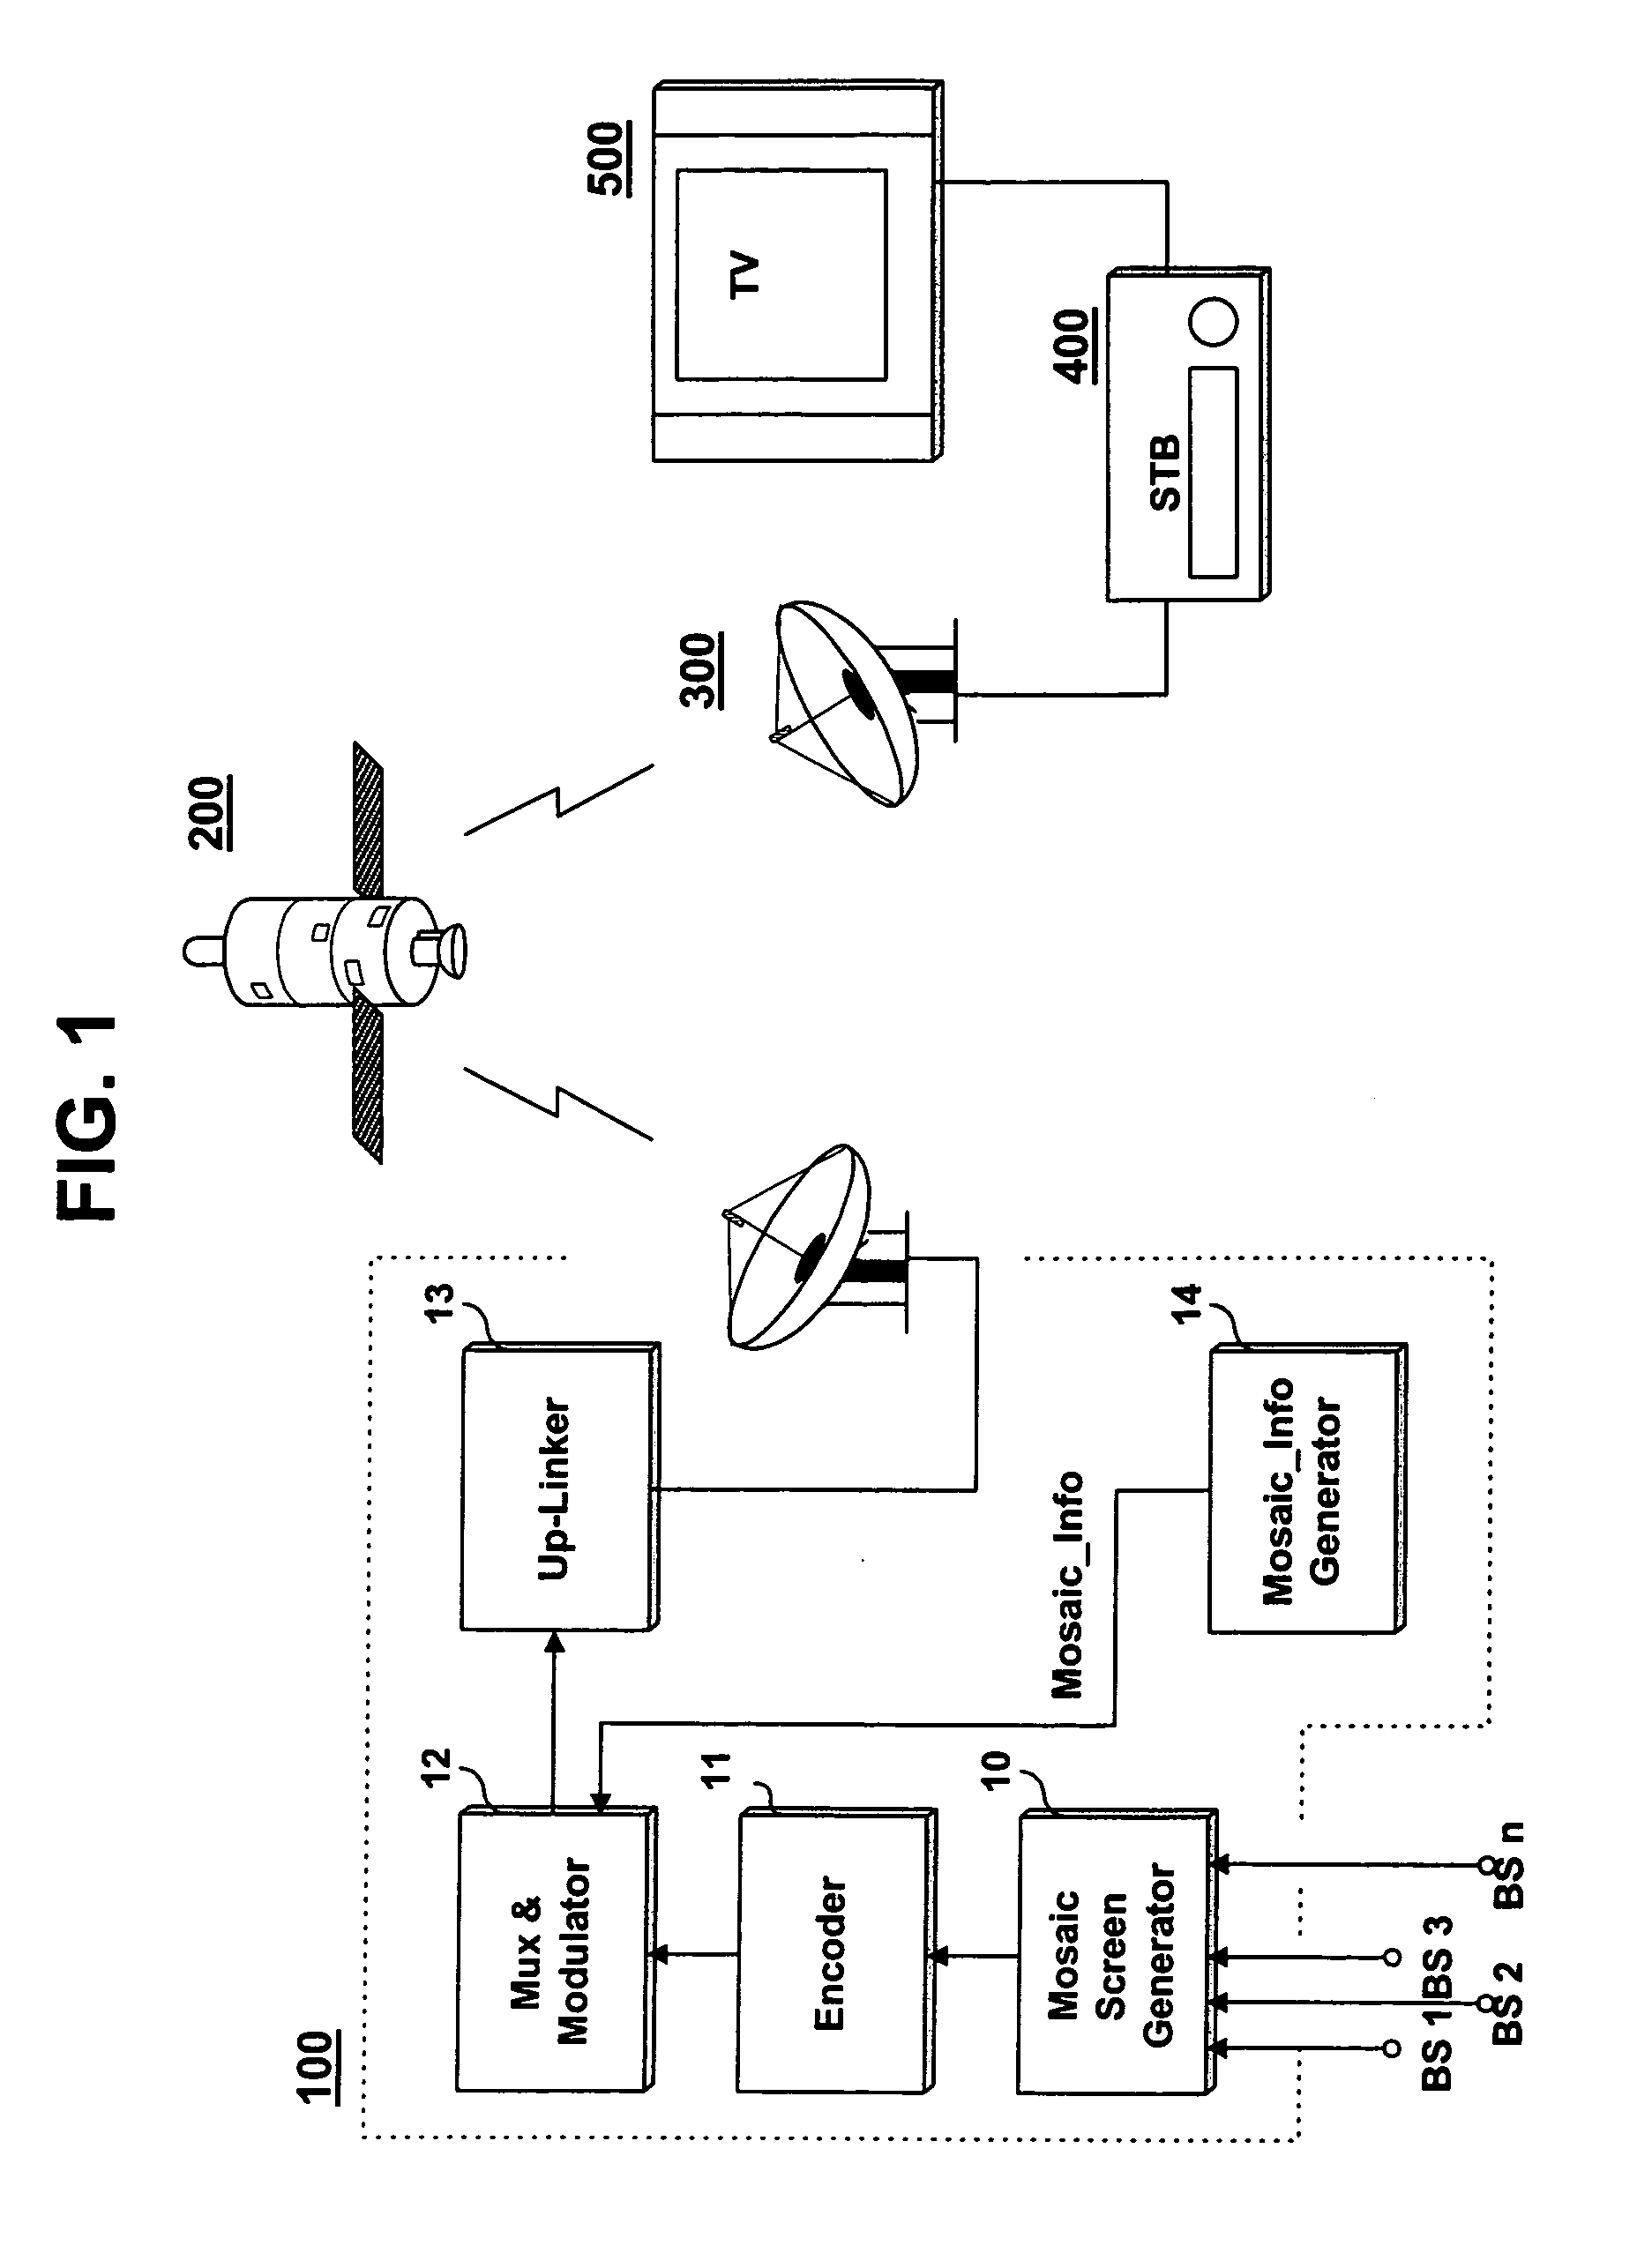 Method for transmitting and receiving audio in Mosaic EPG service